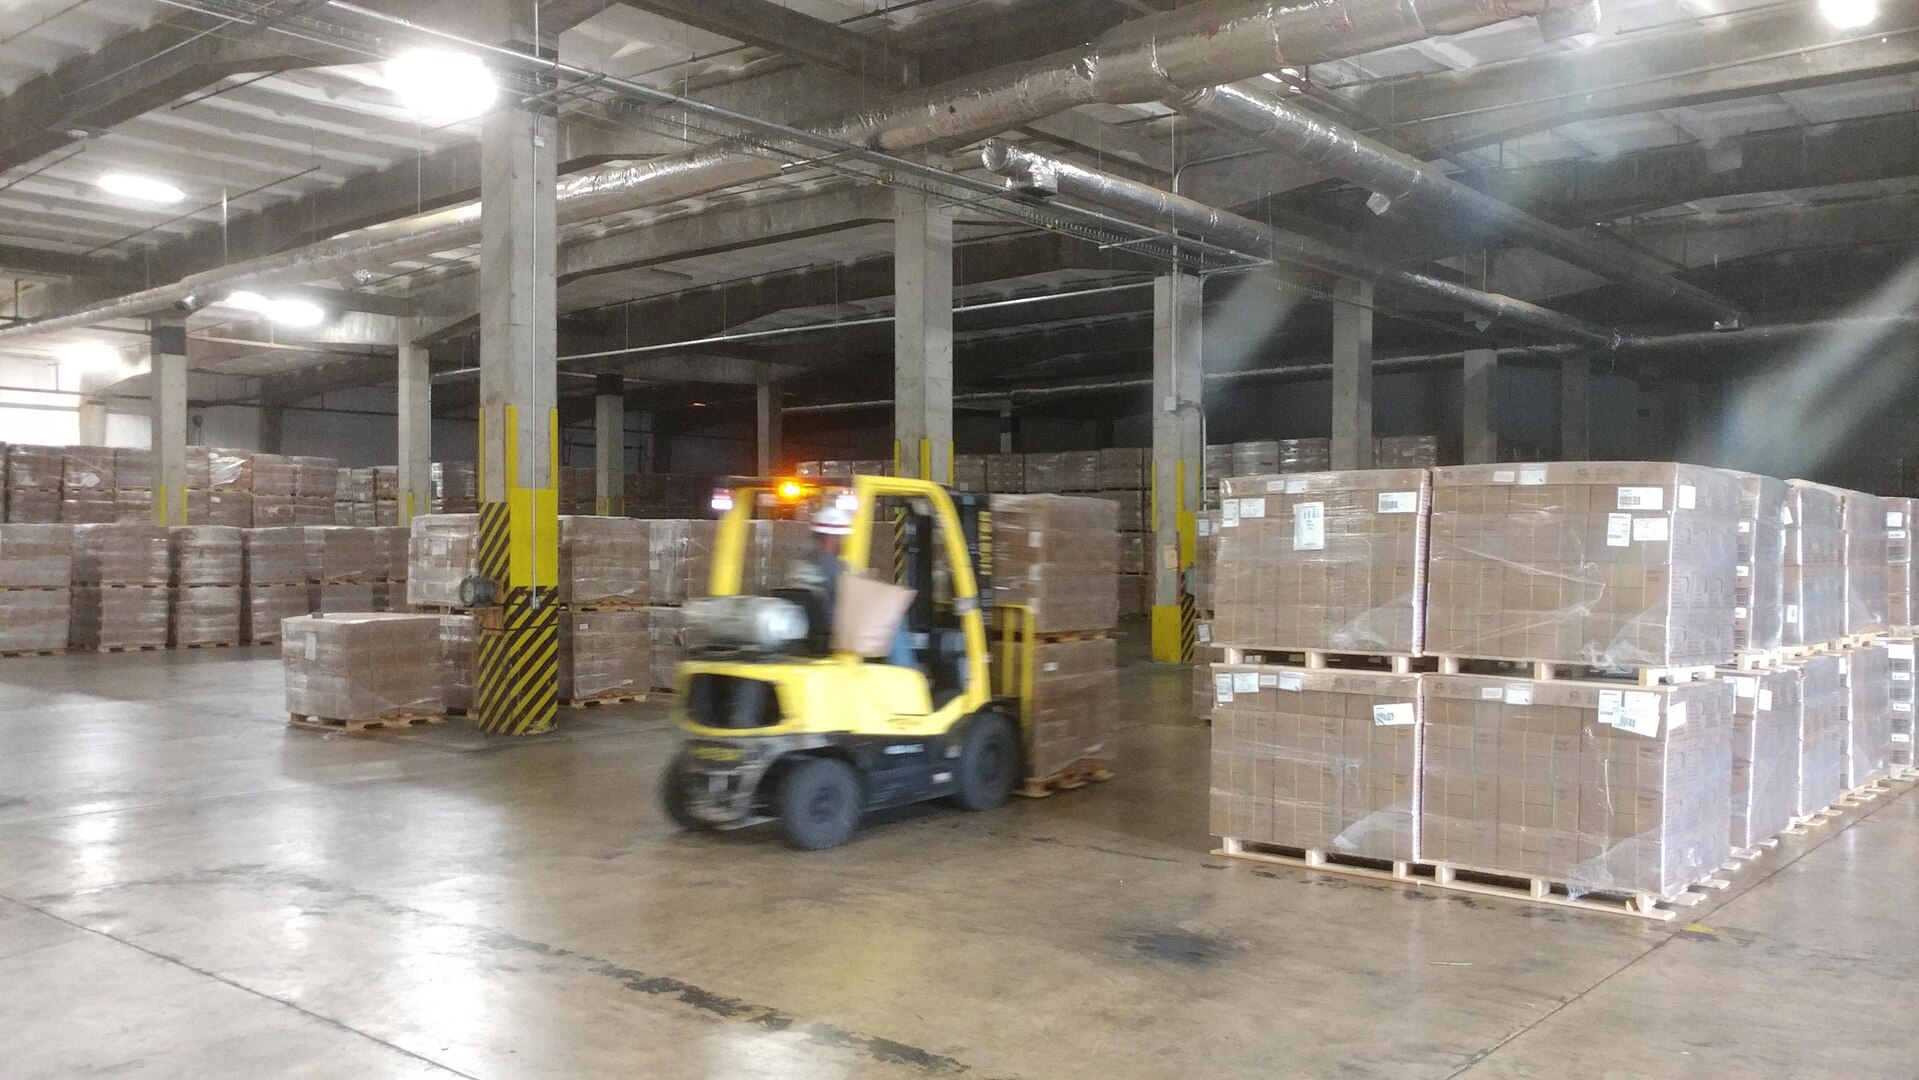 DLA Distribution Albany, Georgia ships more than 80,000 MREs to Texas and Florida in support of the relief efforts for Hurricanes Harvey and Irma.